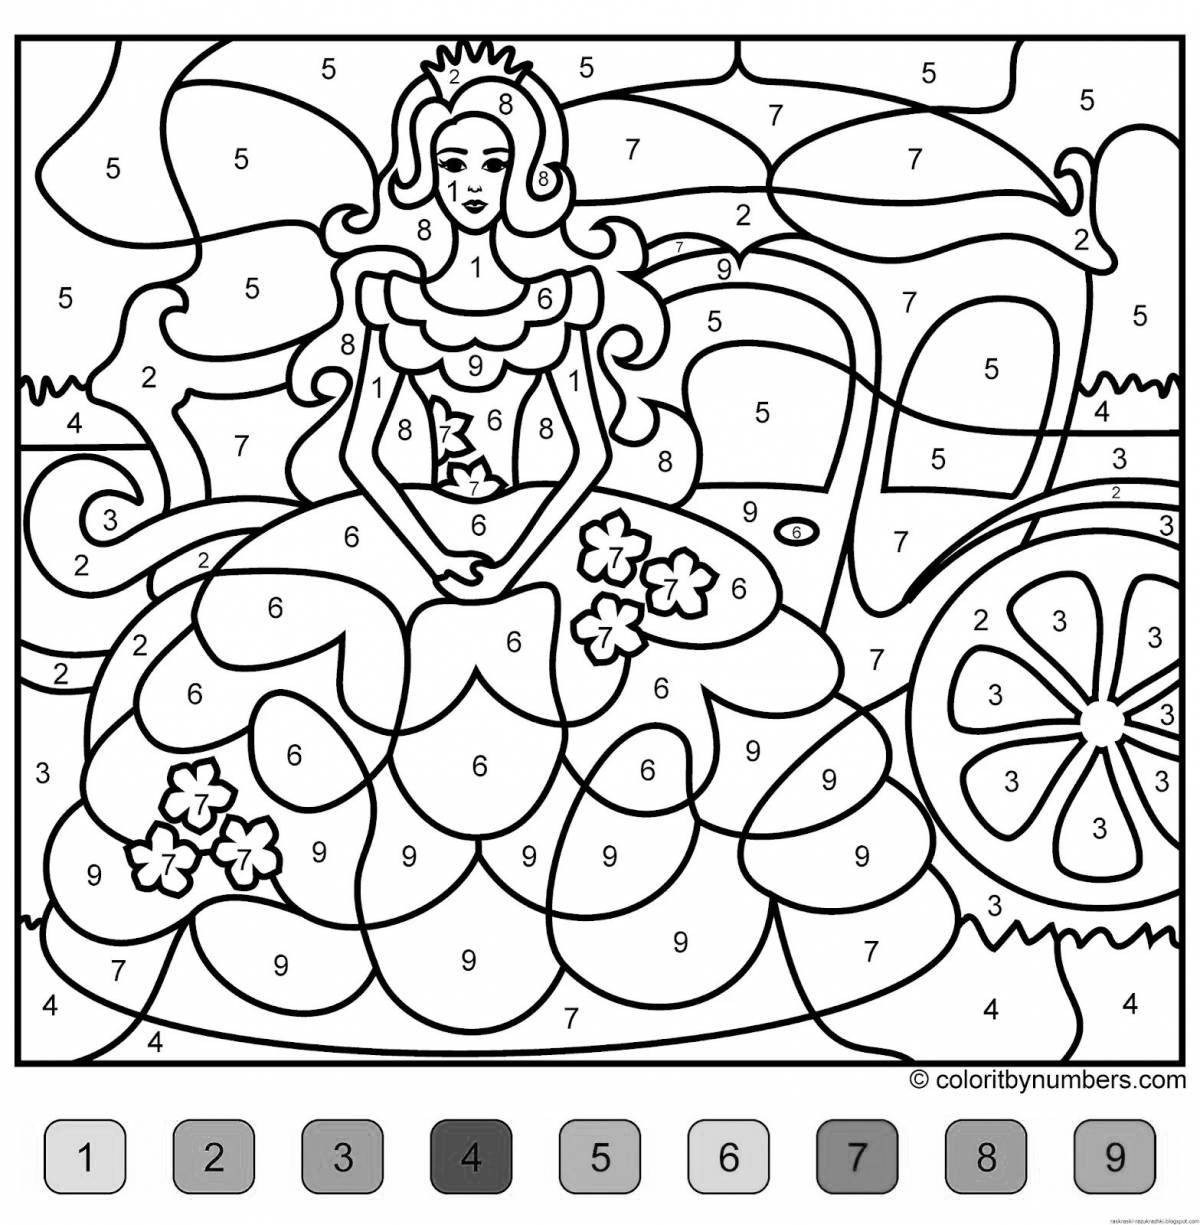 Stimulating coloring book for 8 year olds